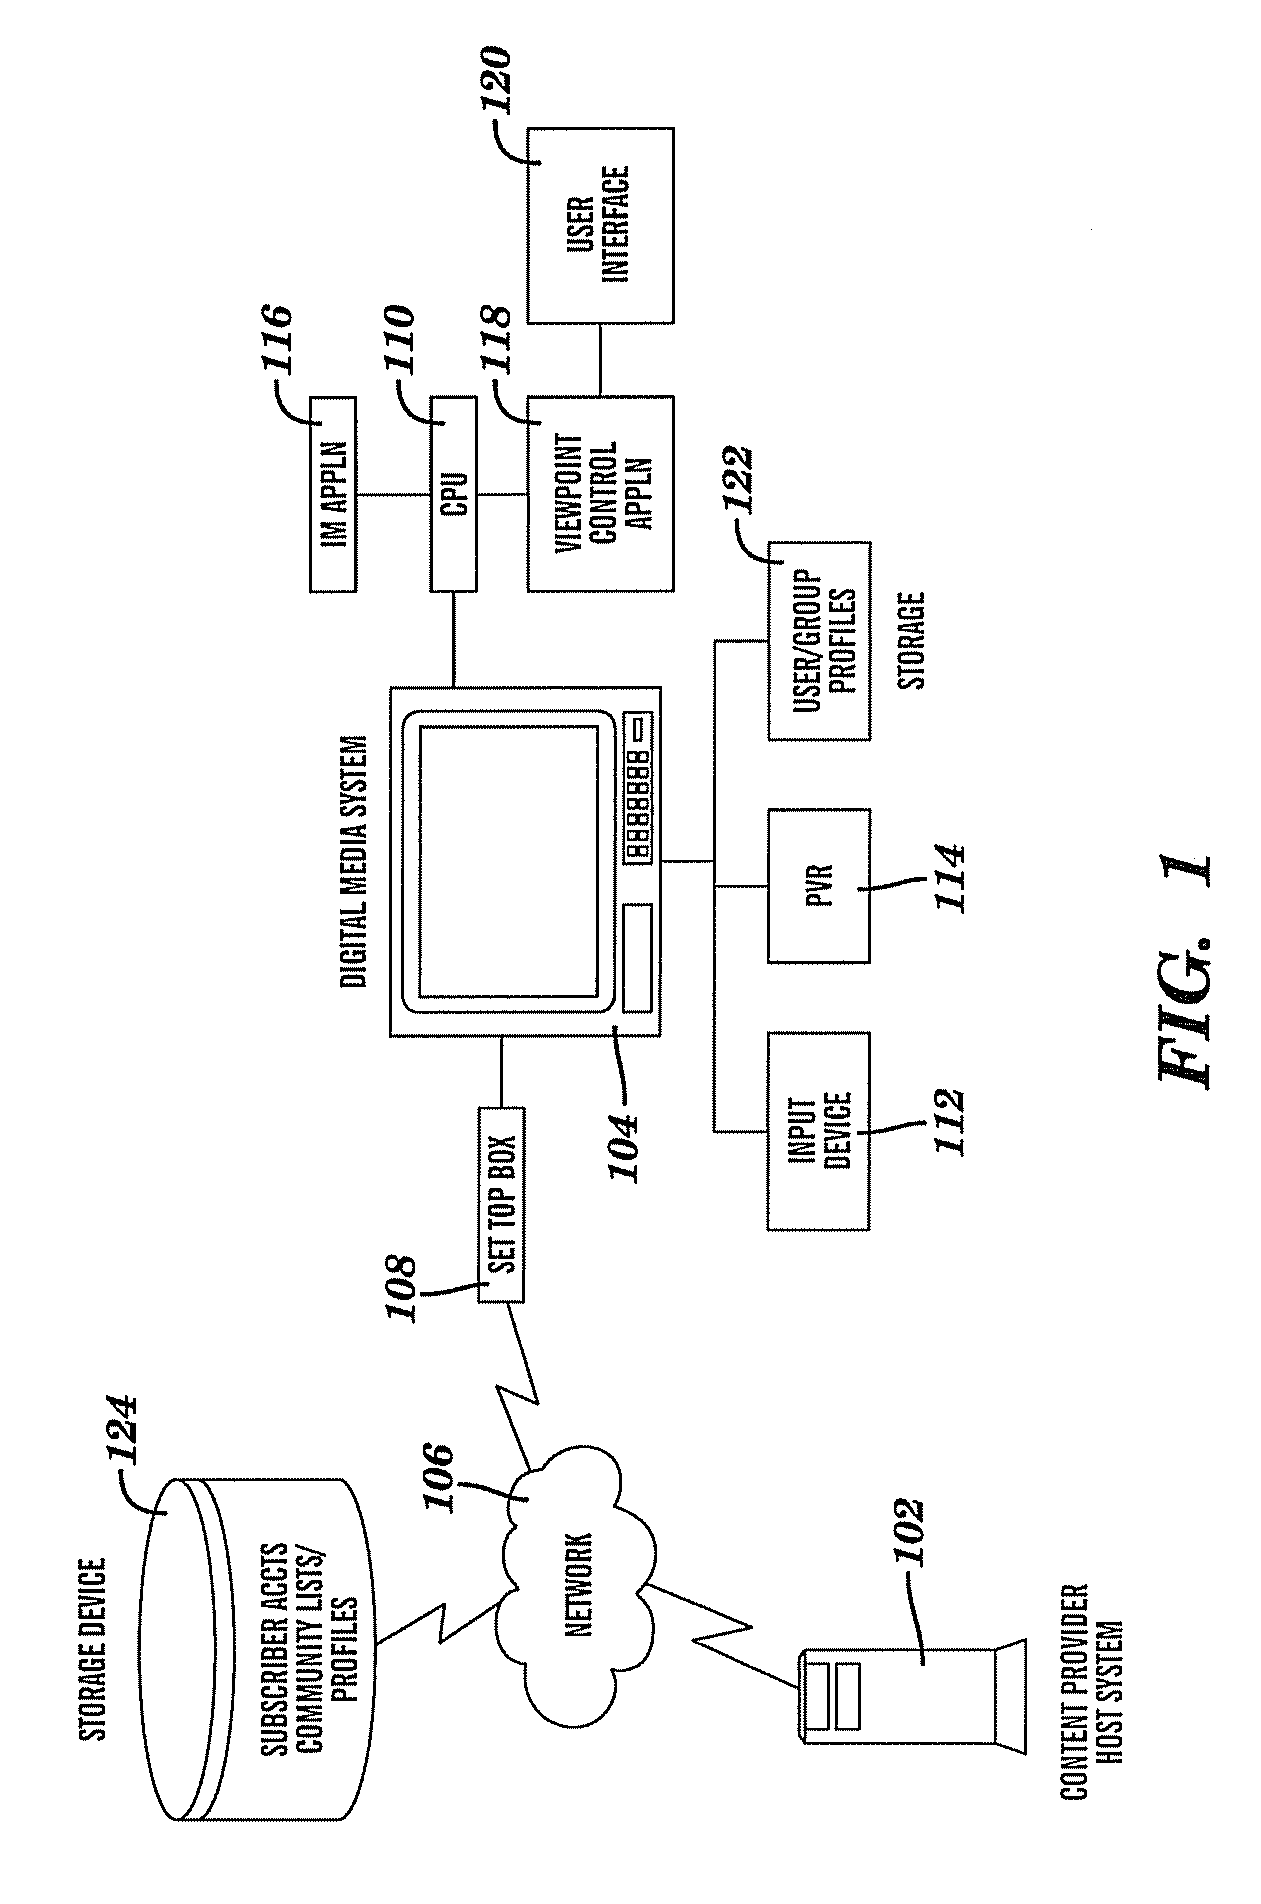 Methods, systems, and computer program products for facilitating interactive programming services